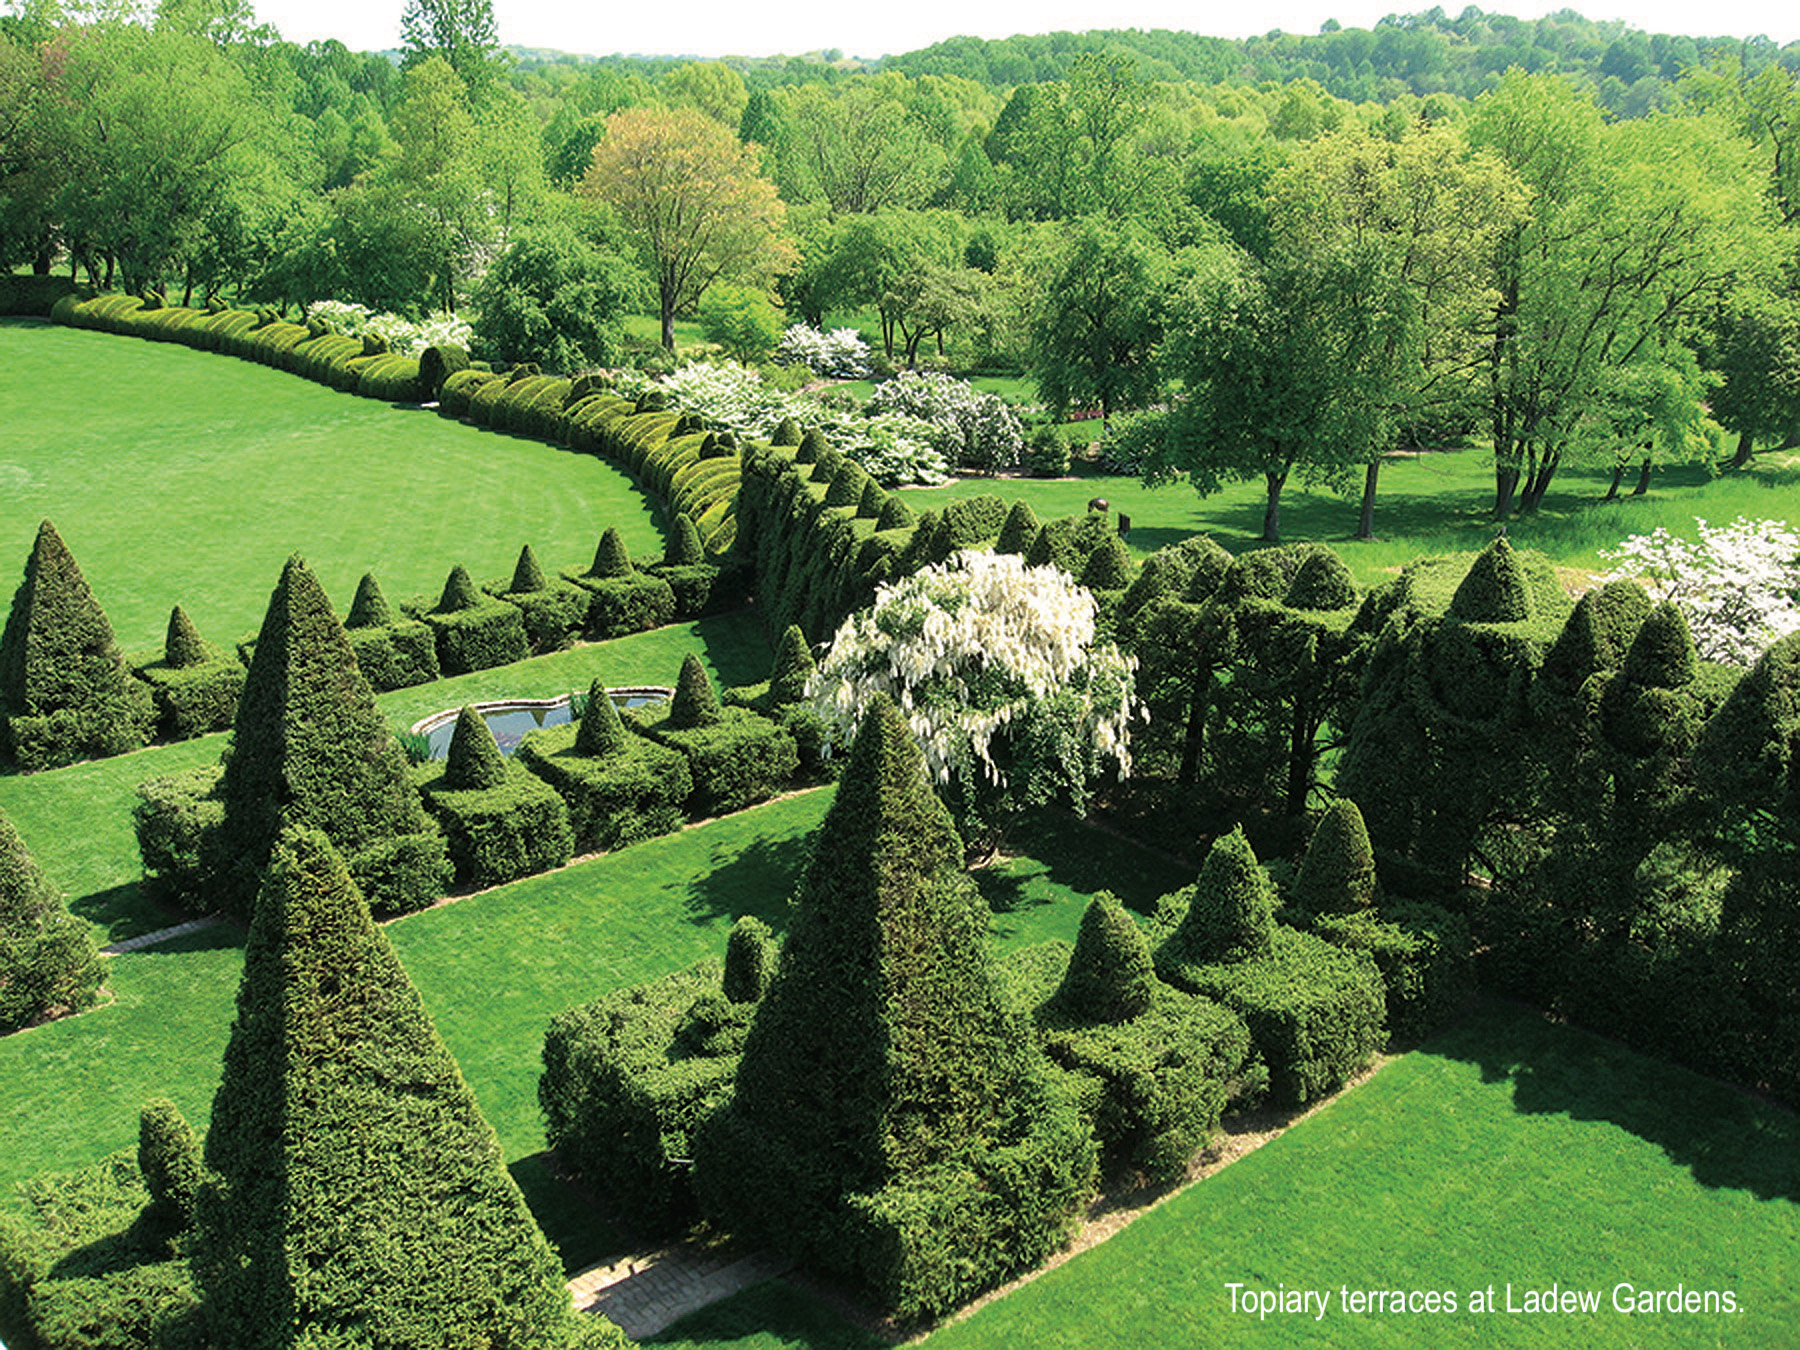 Topiary Terrace at Ladew Gardens